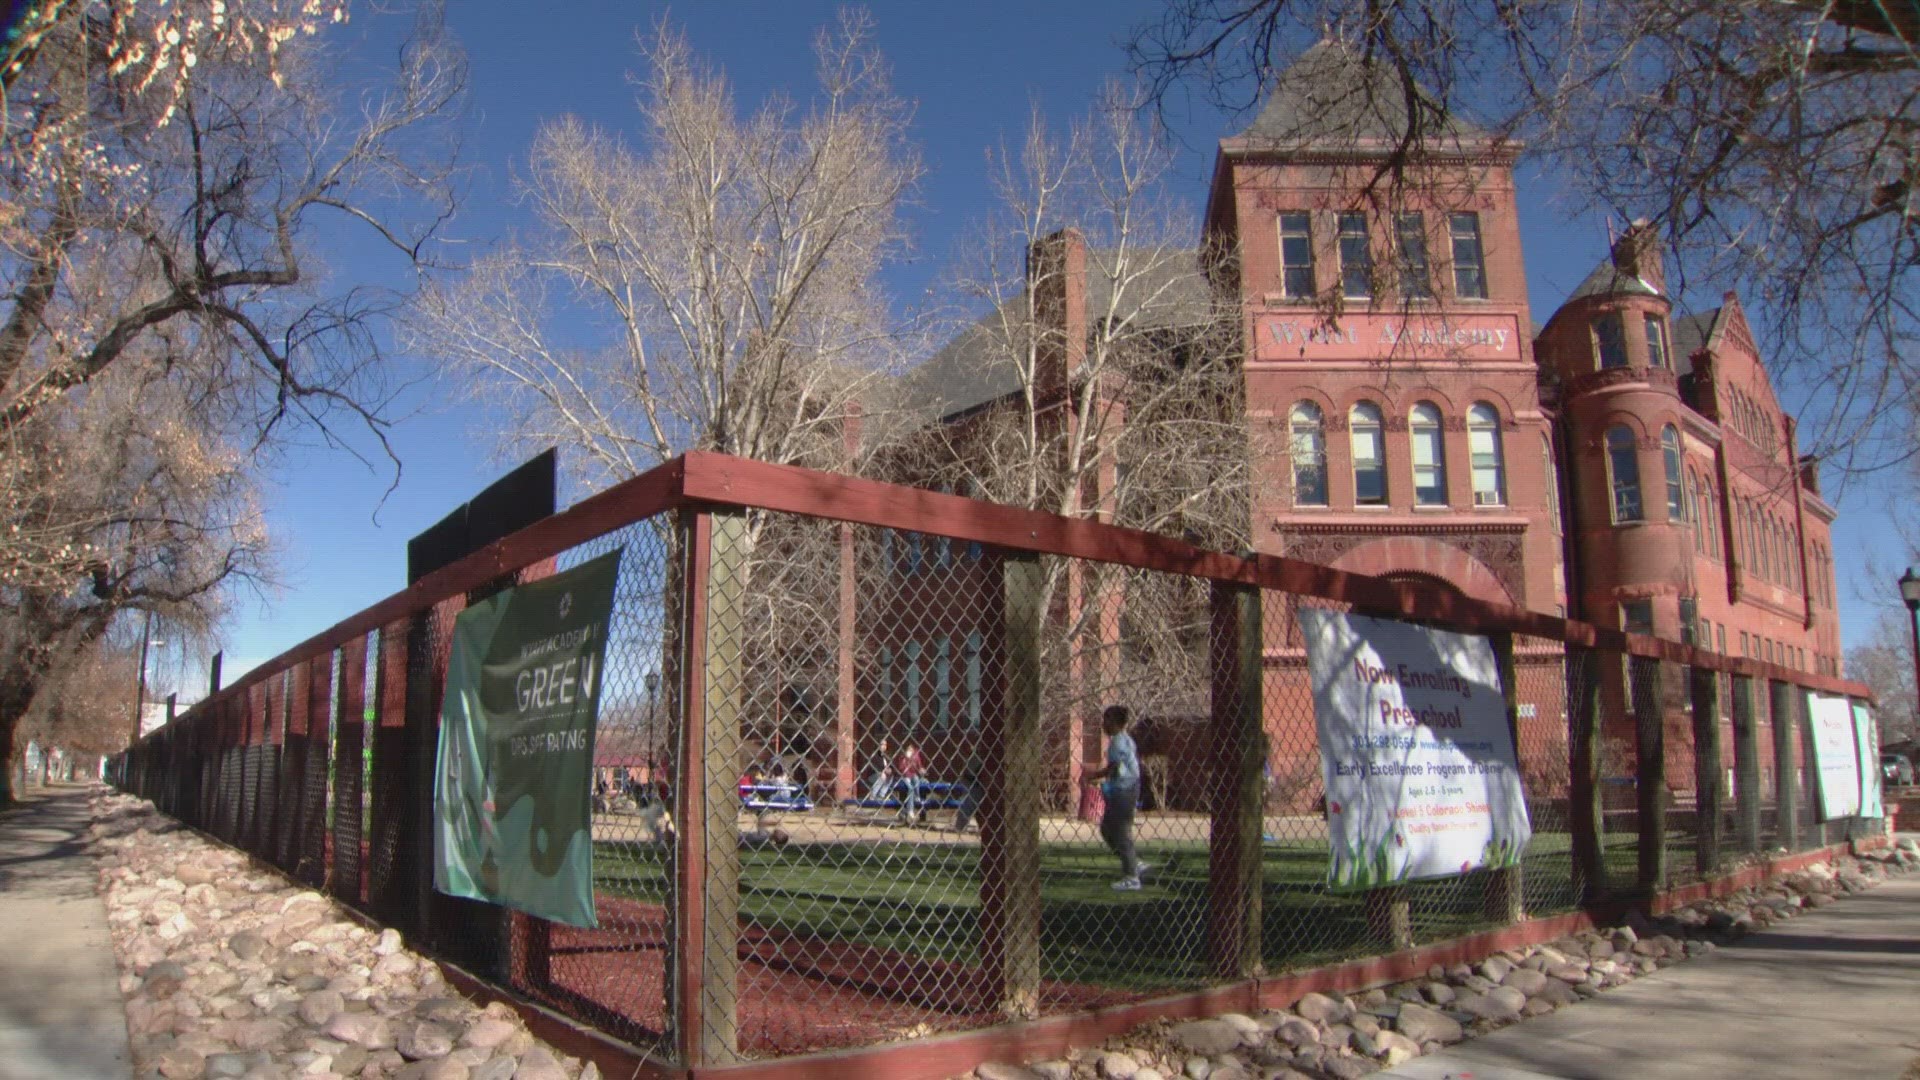 Despite the 5-4 vote for closure, the Denver charter school will remain open because it failed to meet the 60% threshold required for closure.